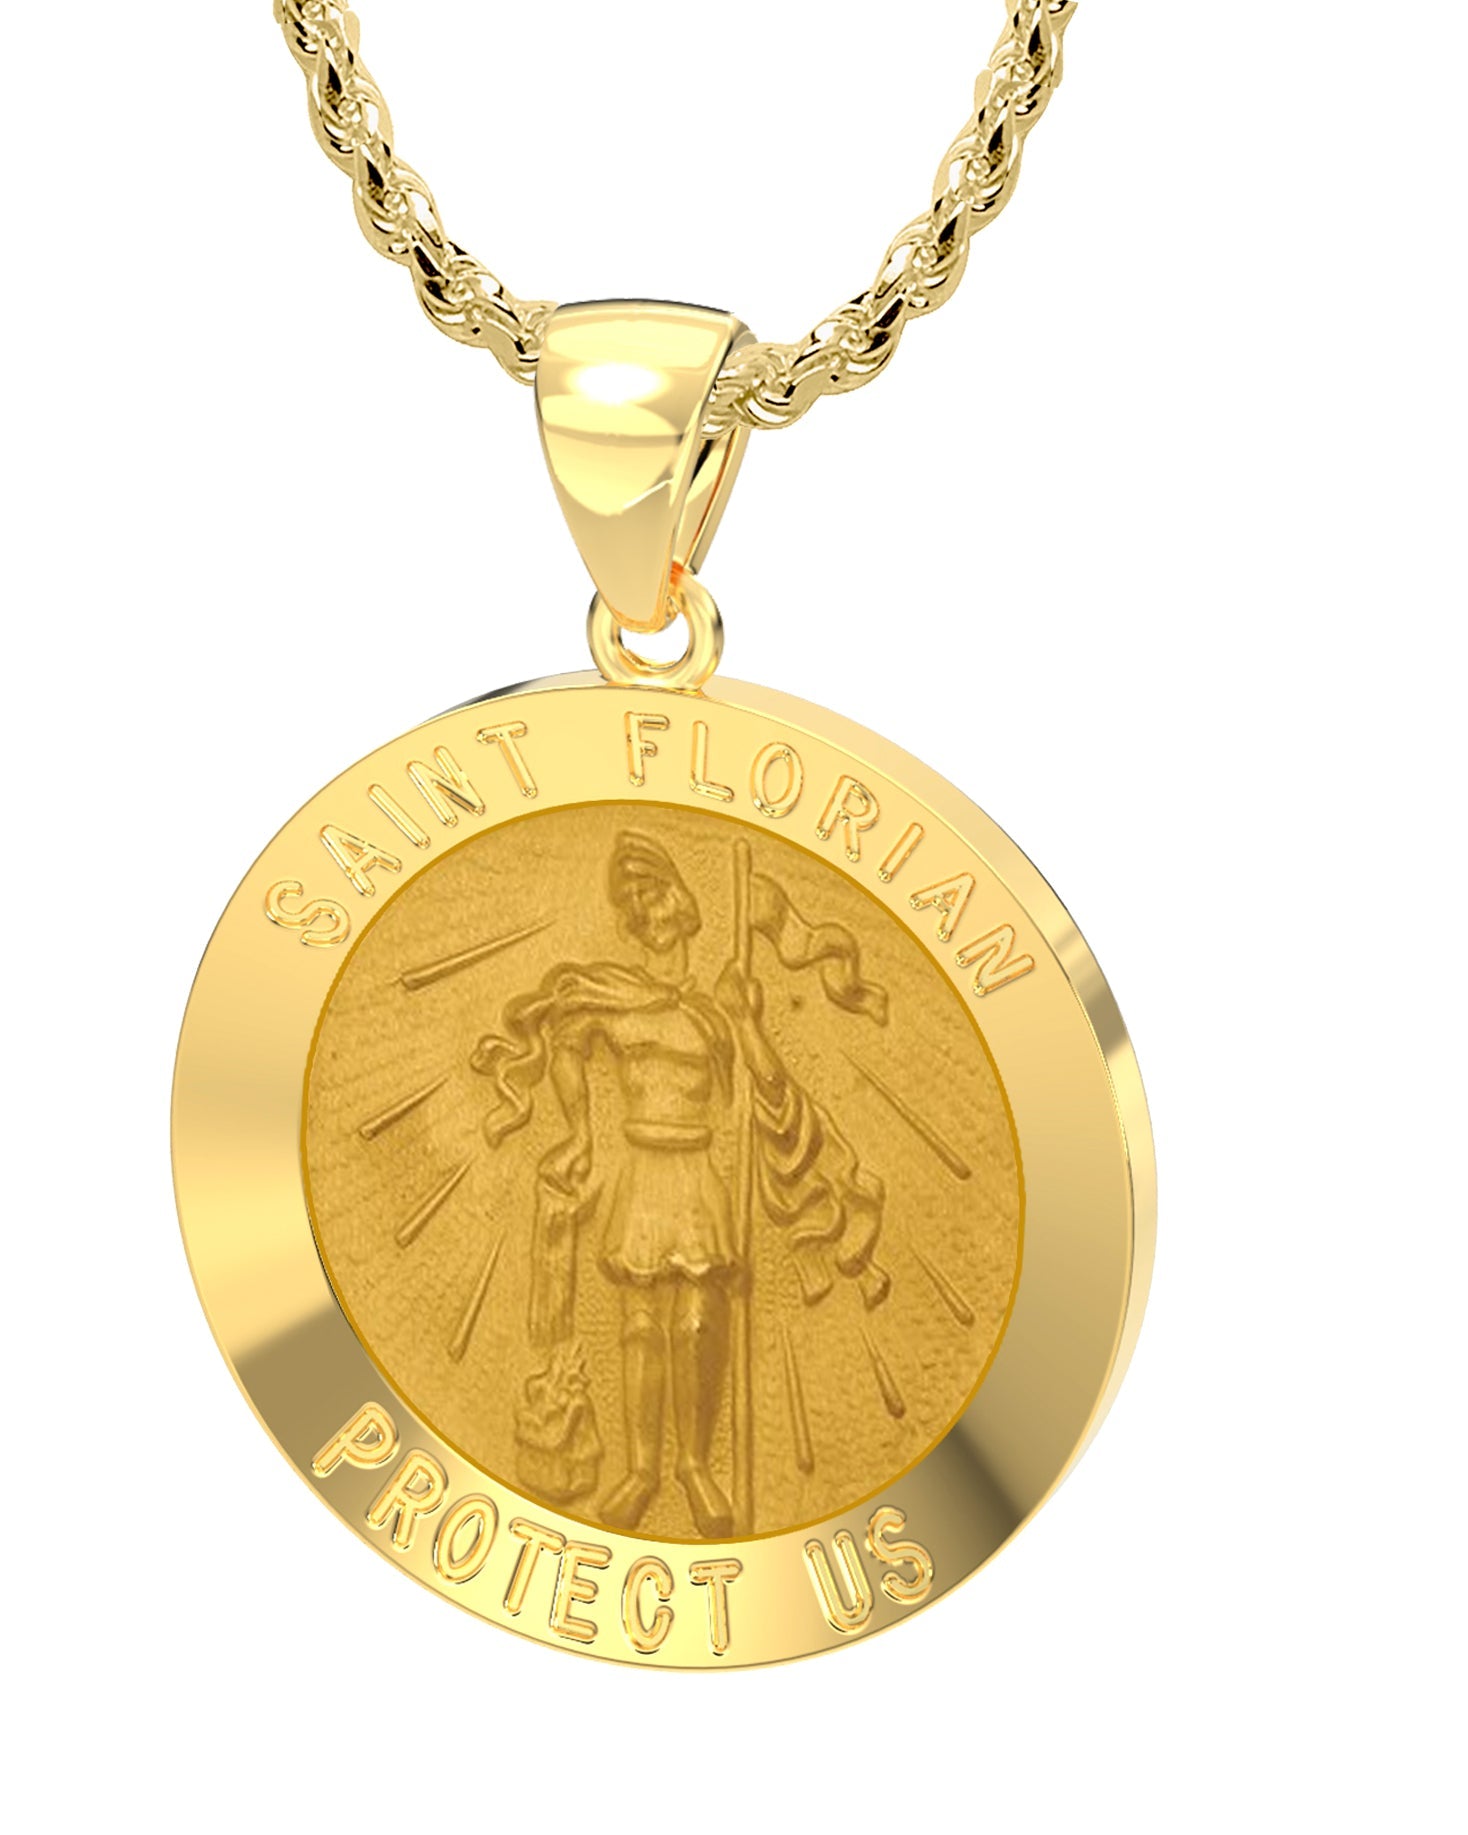 St Florian Firefighter Pendant - Round Pendant Necklace In Gold